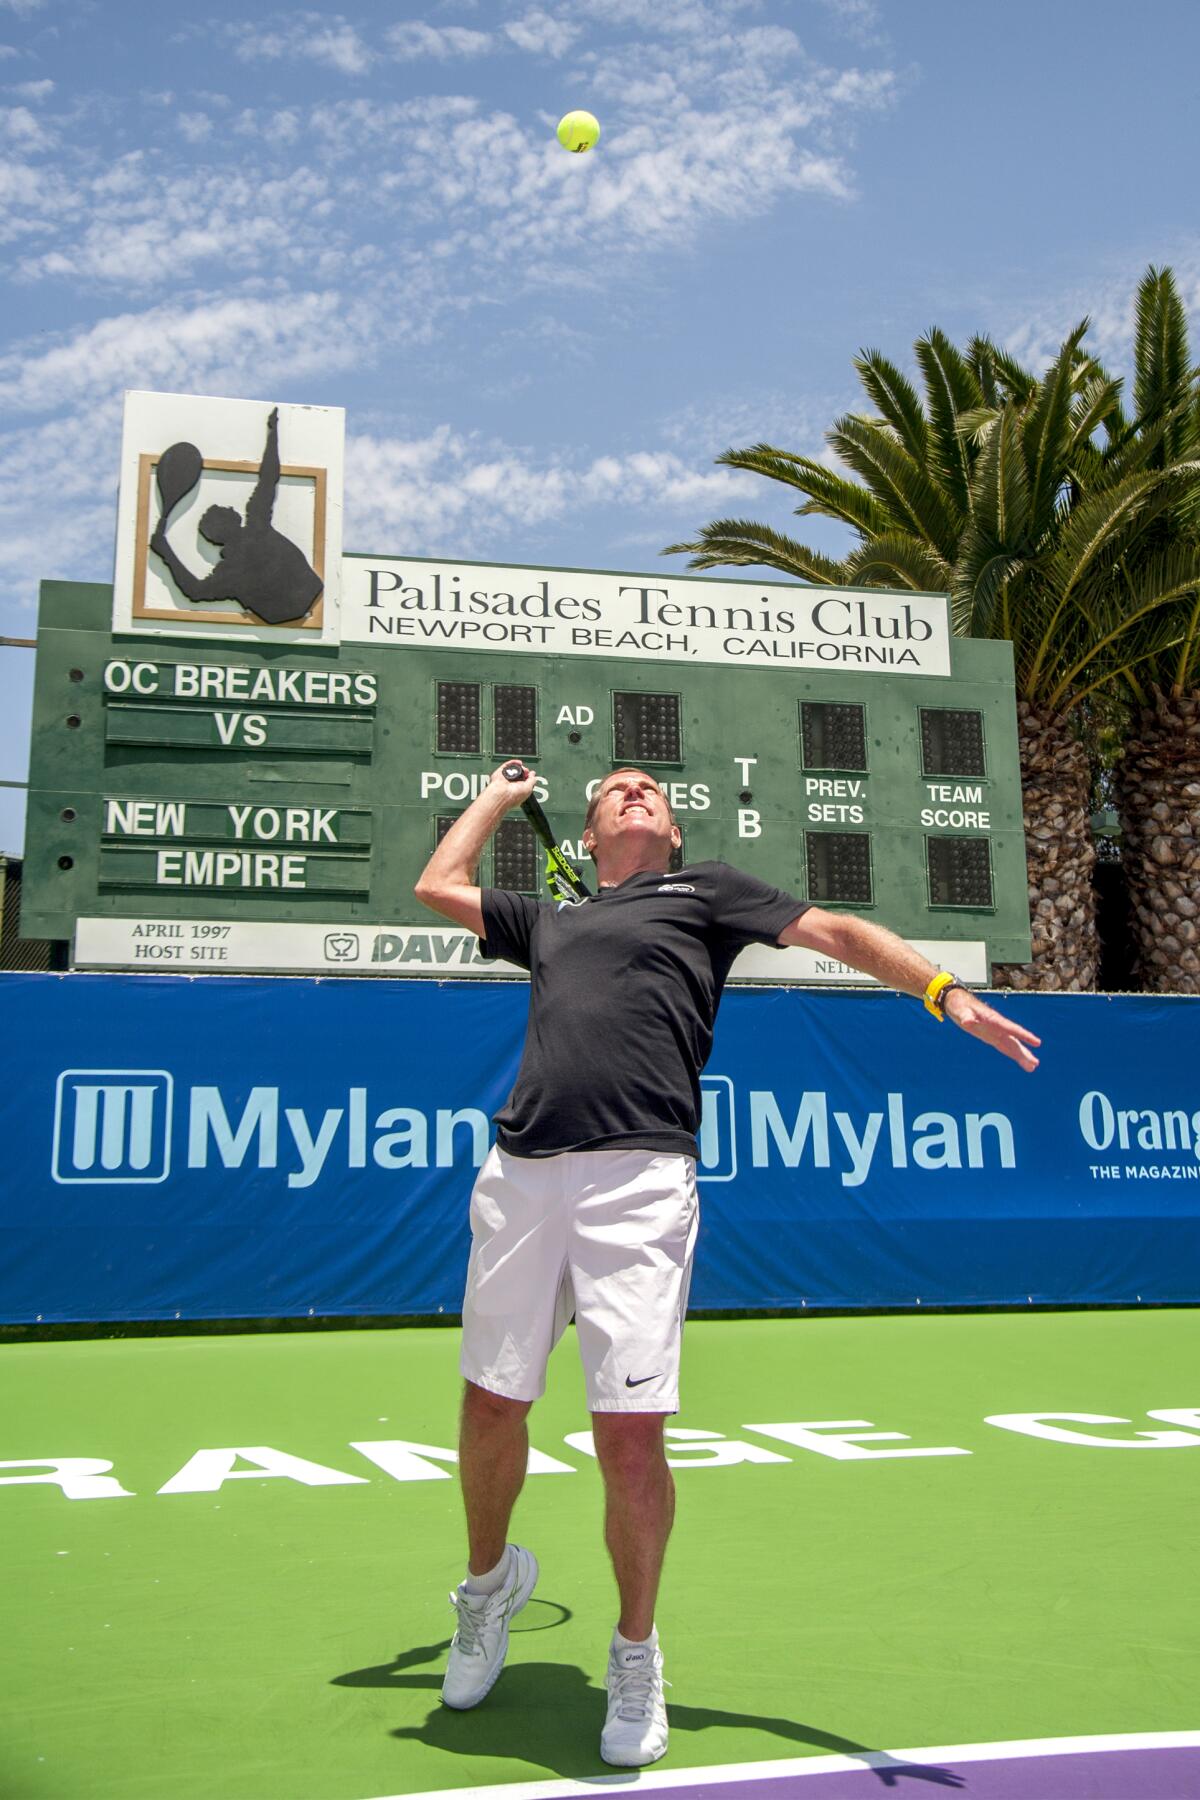 Eric Davidson, owner of the Orange County Breakers professional tennis team, serves a ball at the team's home venue, the Palisades Tennis Club in Newport Beach.